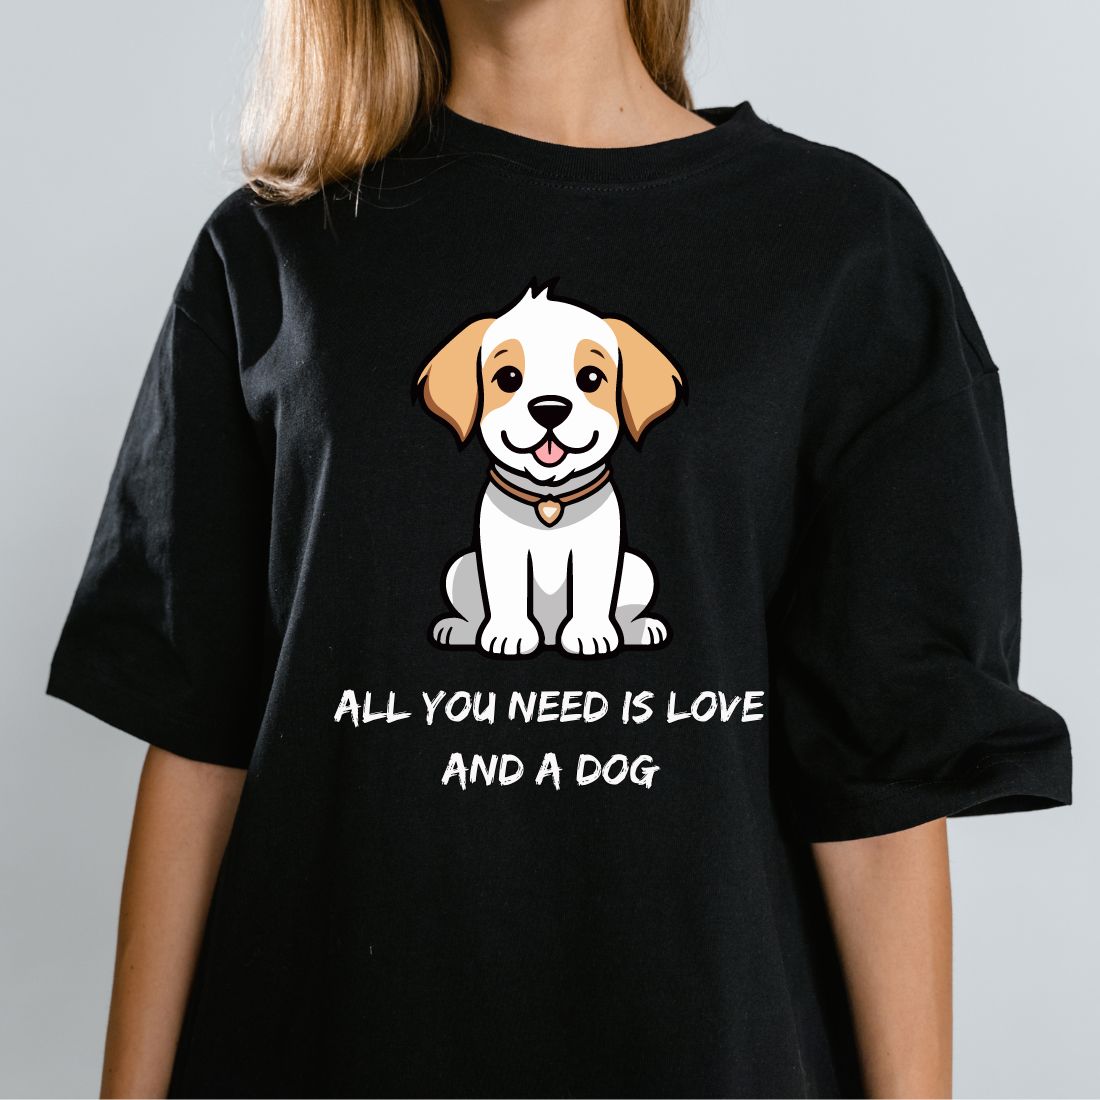 Adorable design “All You Need is Love and a Dog” preview image.